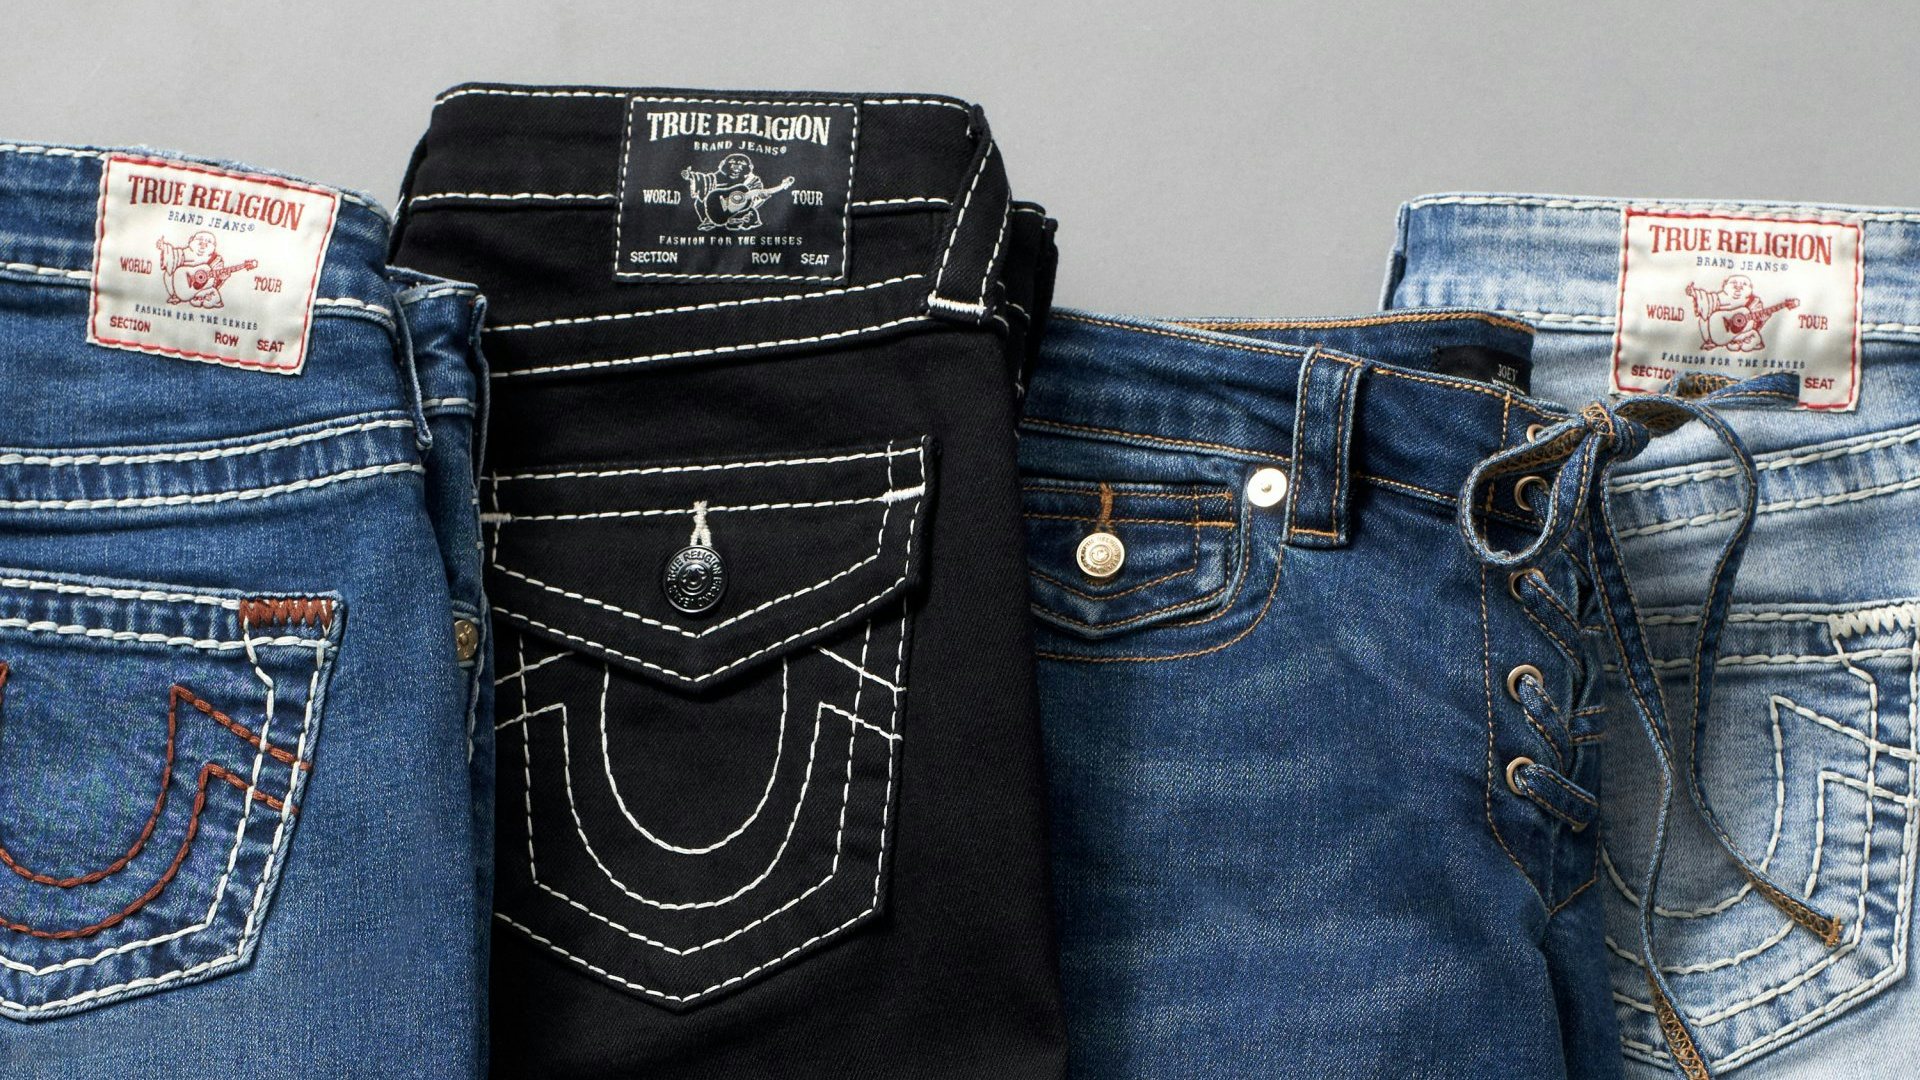 The American denim label is the latest contender entering the Chinese market and could challenge established jean brands like Levi's and Guess. Photo: True Religion 